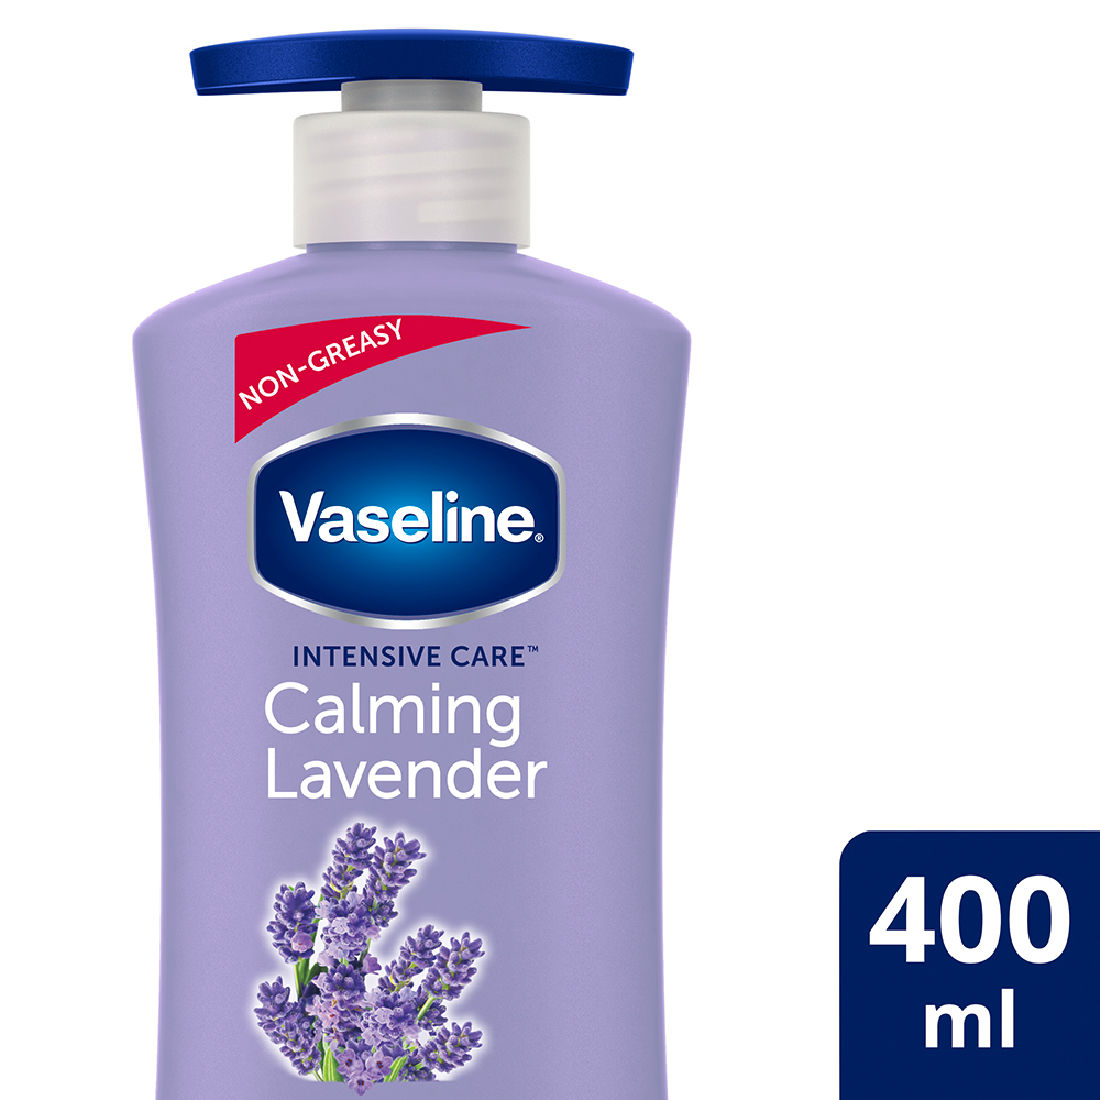 Vaseline Intensive Care Calming Lavender Body Lotion, 400 ml, Pack of 1 